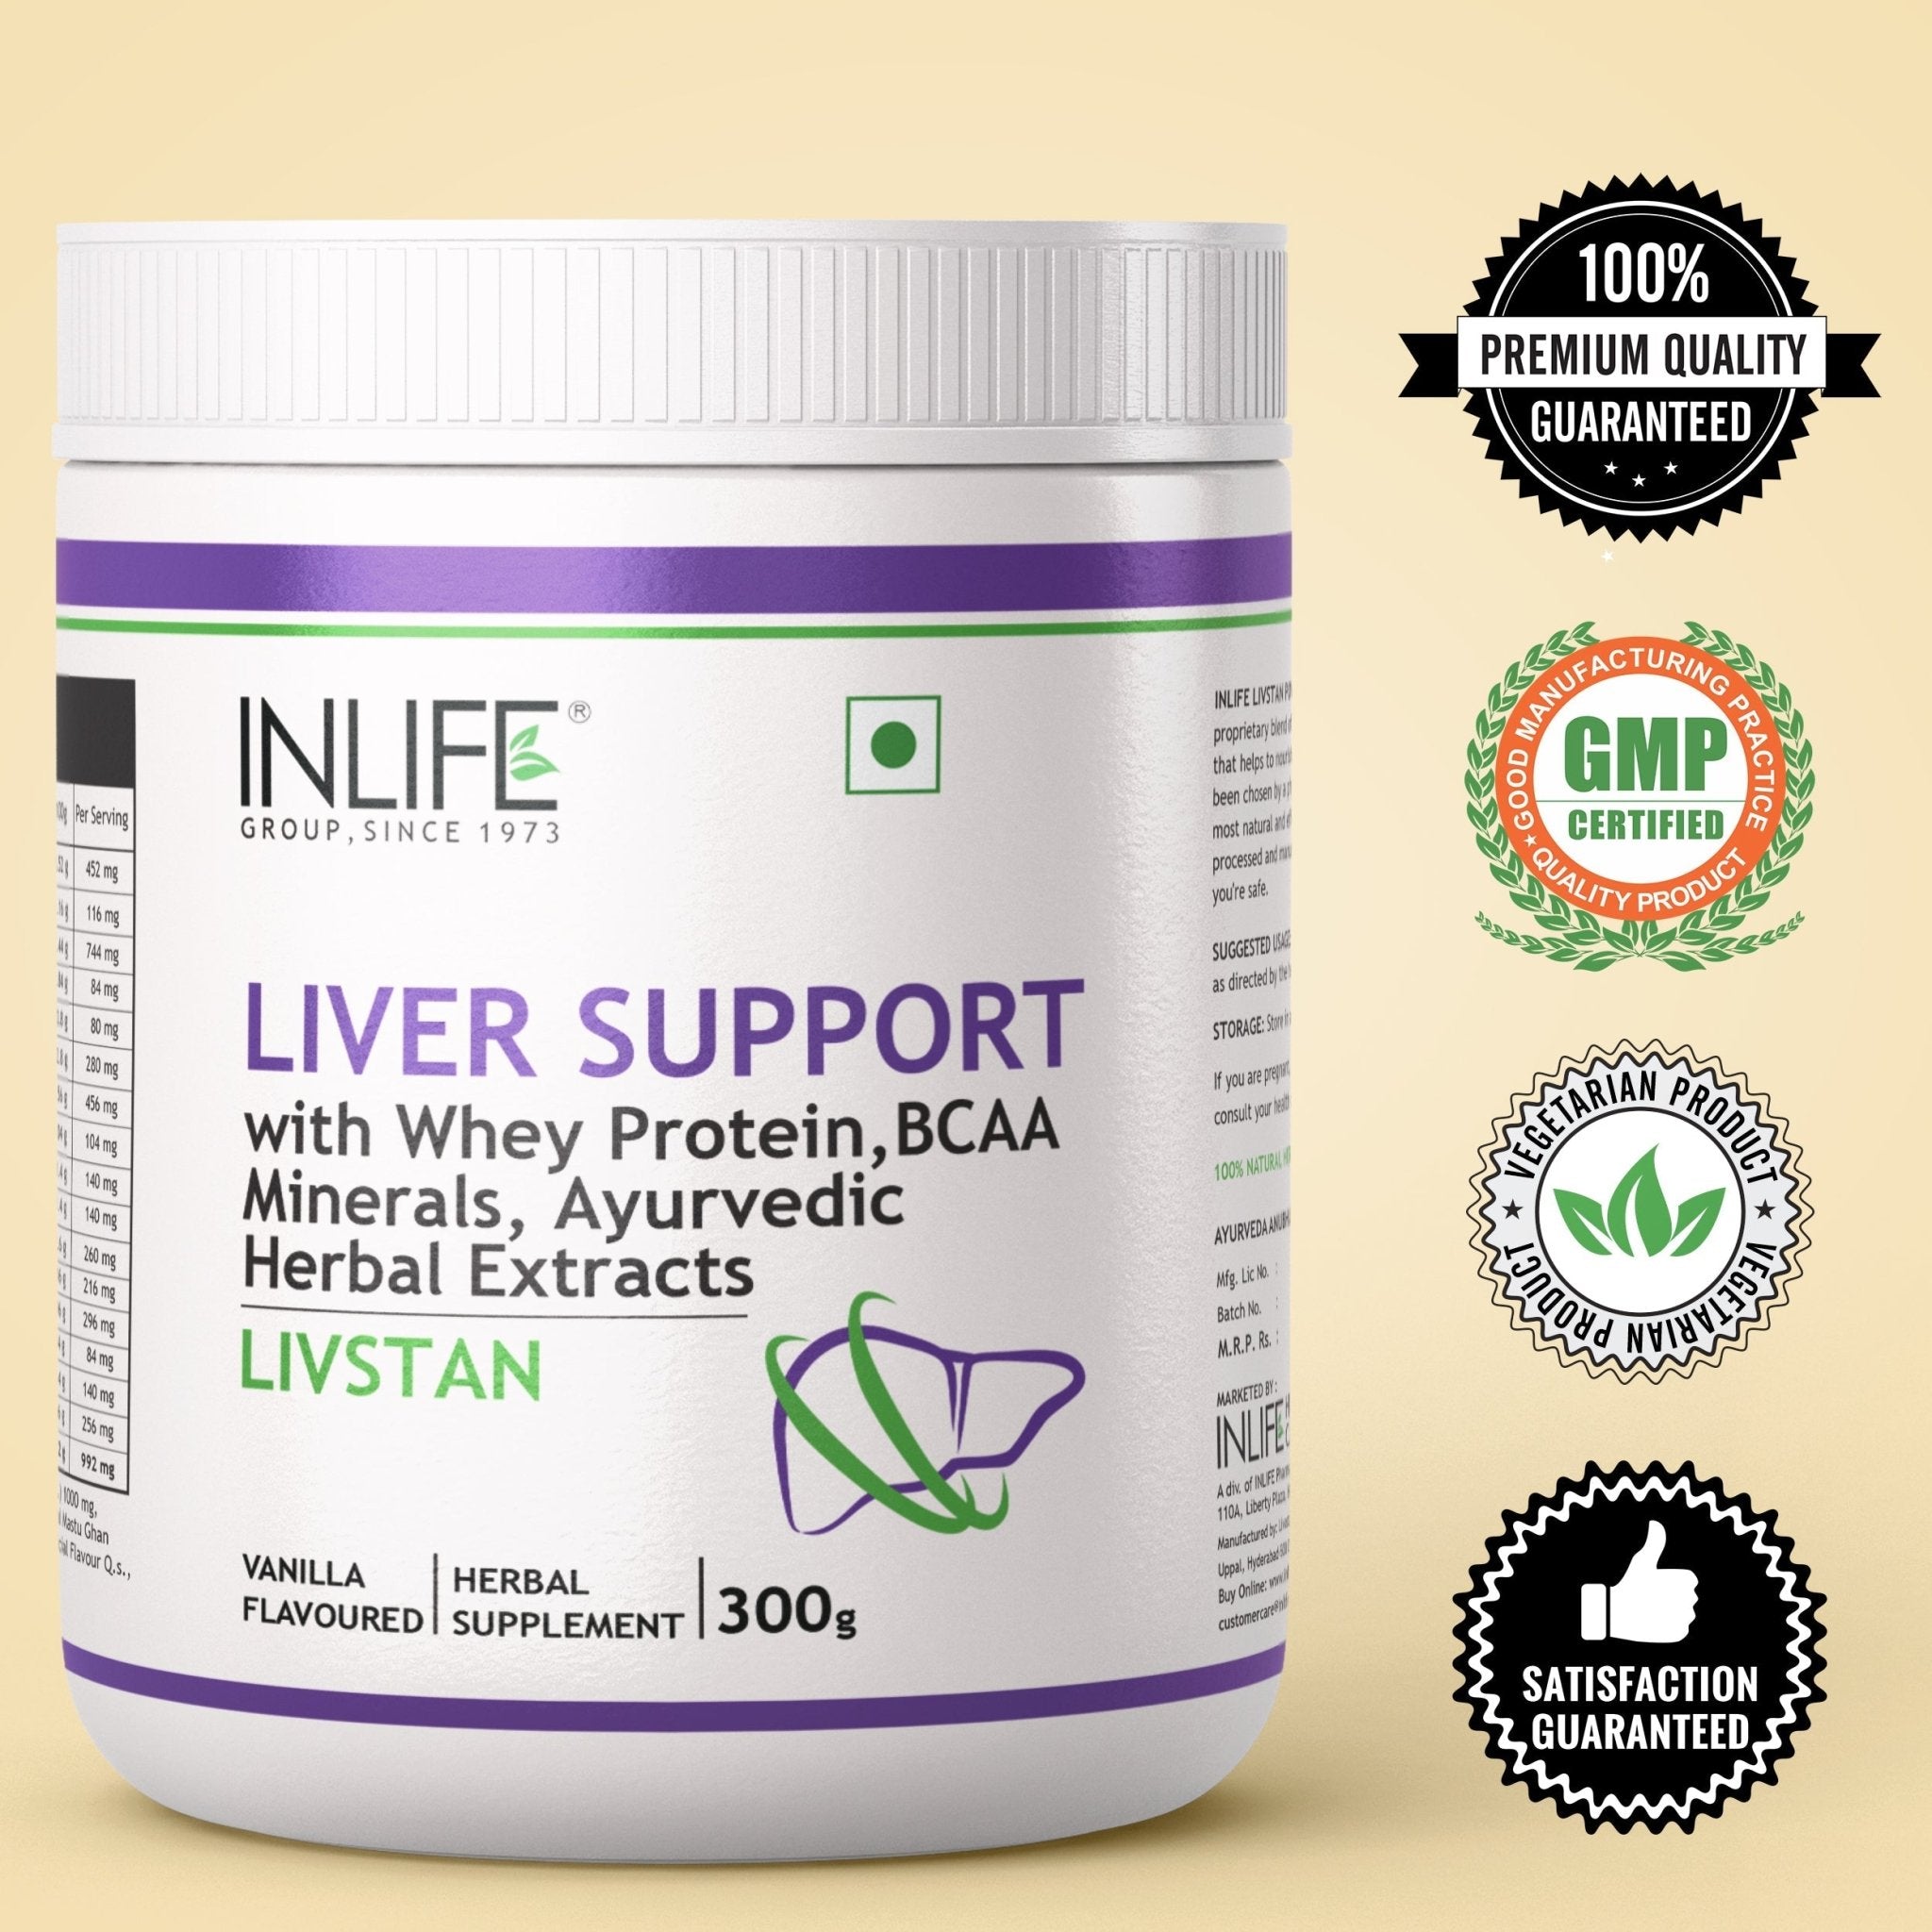 INLIFE Livstan Liver Support Powder, Whey Protein with Ayurvedic Herbs, 300g (Vanilla) - Inlife Pharma Private Limited